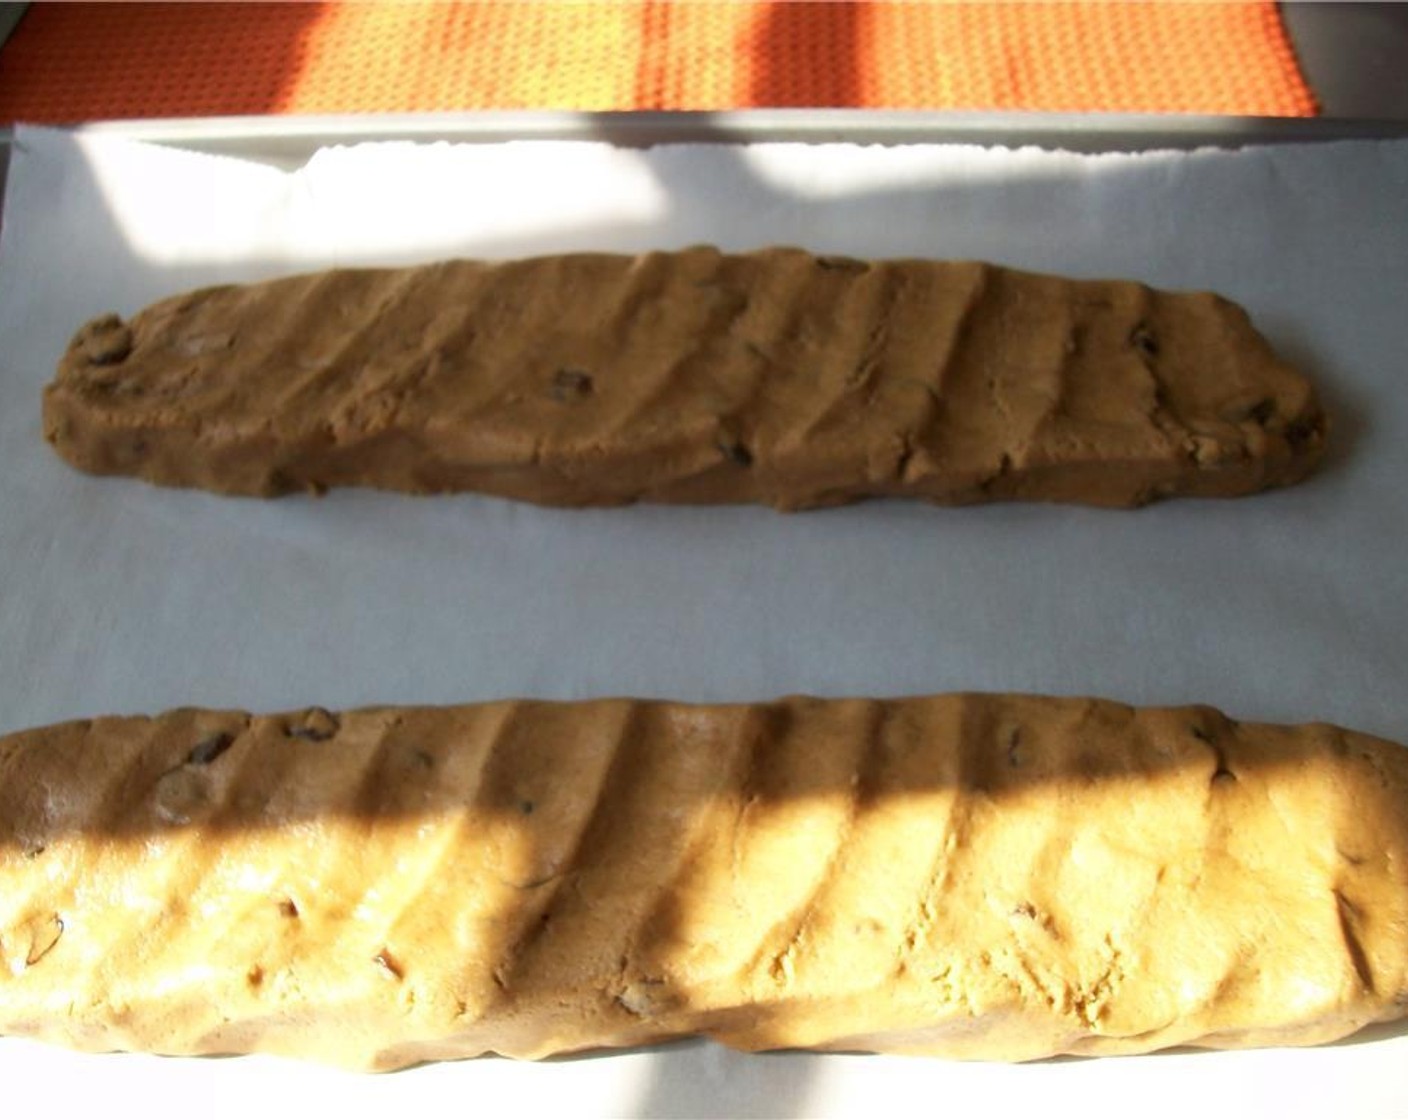 step 6 Divide dough into two equal pieces and shape each into a 12-inch log placed 3 inches apart on the parchment lined baking sheet. Bake until golden brown and still soft to the touch, about 20-22 minutes.